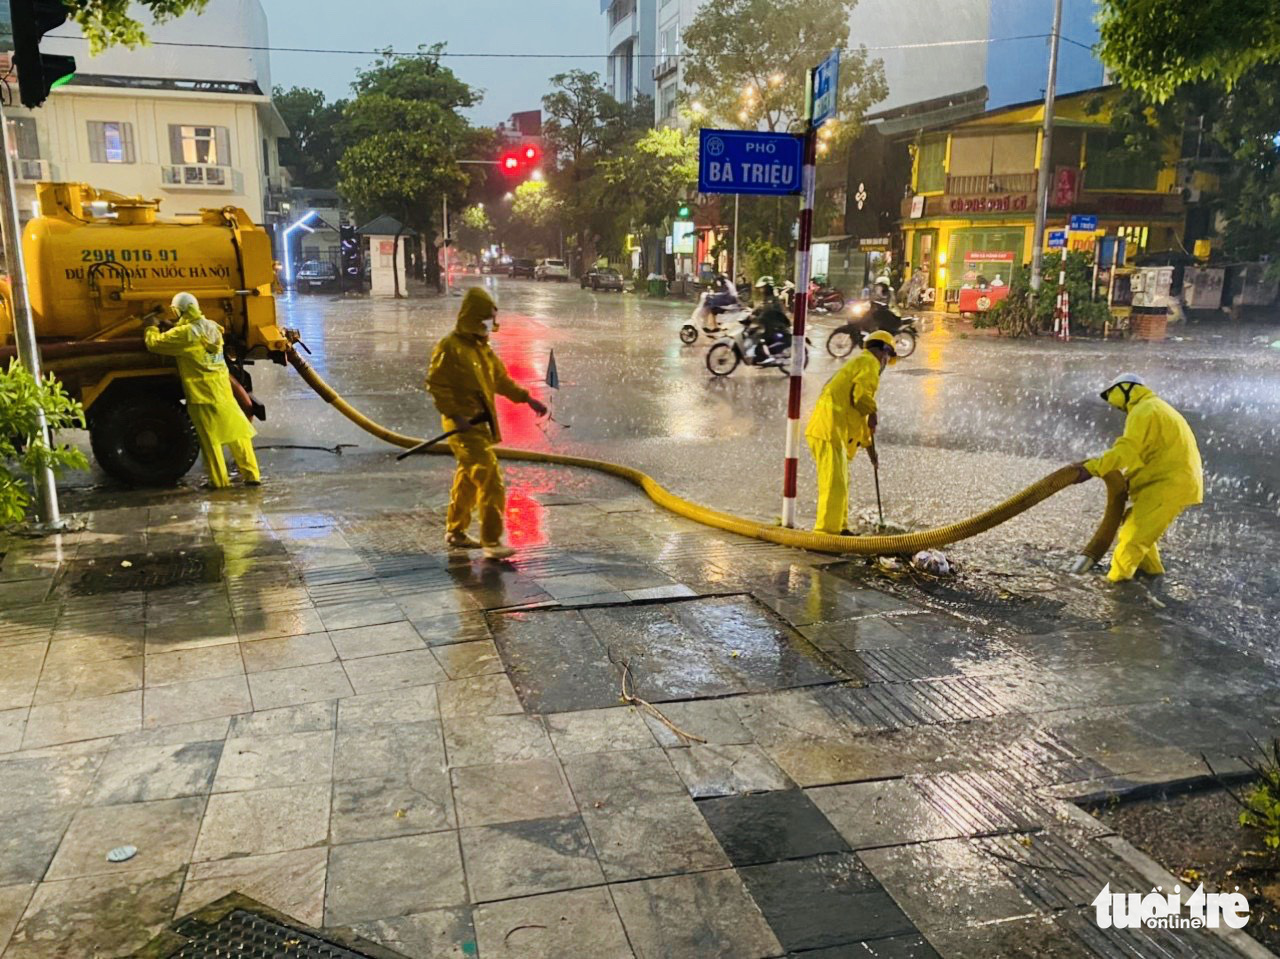 Employees of the Hanoi Sewerage and Drainage Company are mobilized to alleviate the flooding, July 5, 2022. Photo: Q. The / Tuoi Tre